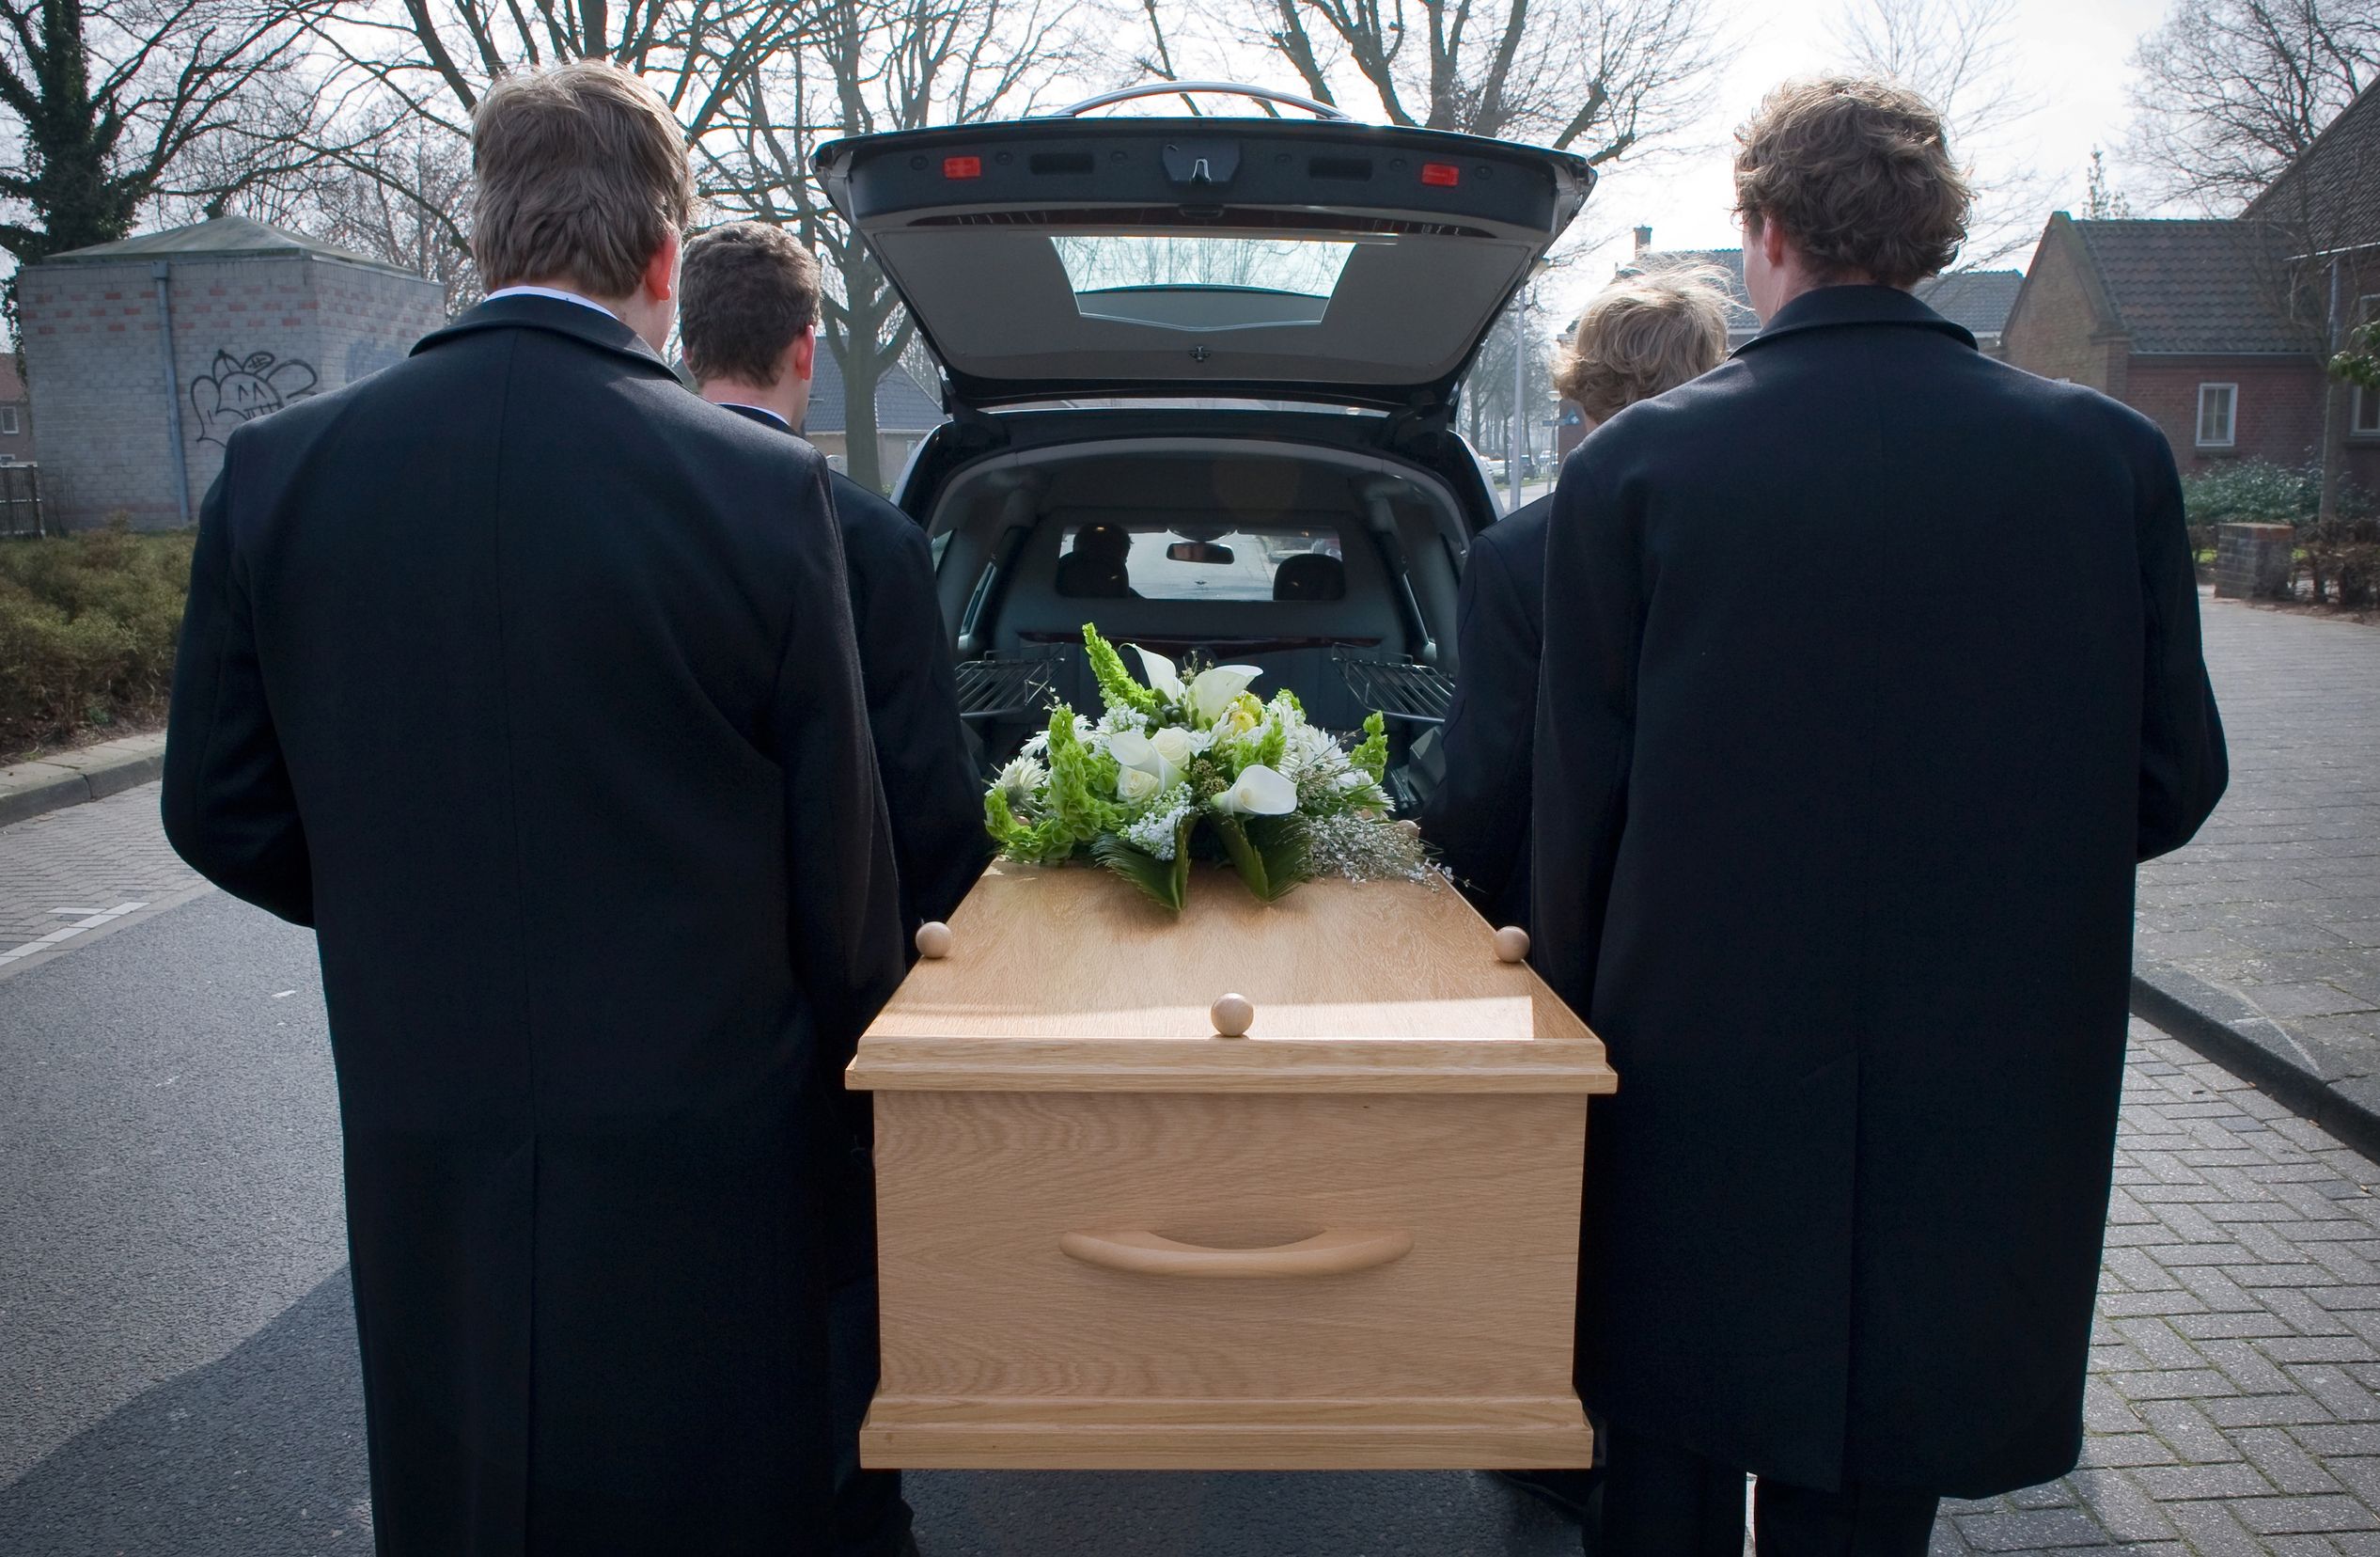 Various Reasons People Choose Cremation Services in Roeland Park, KS